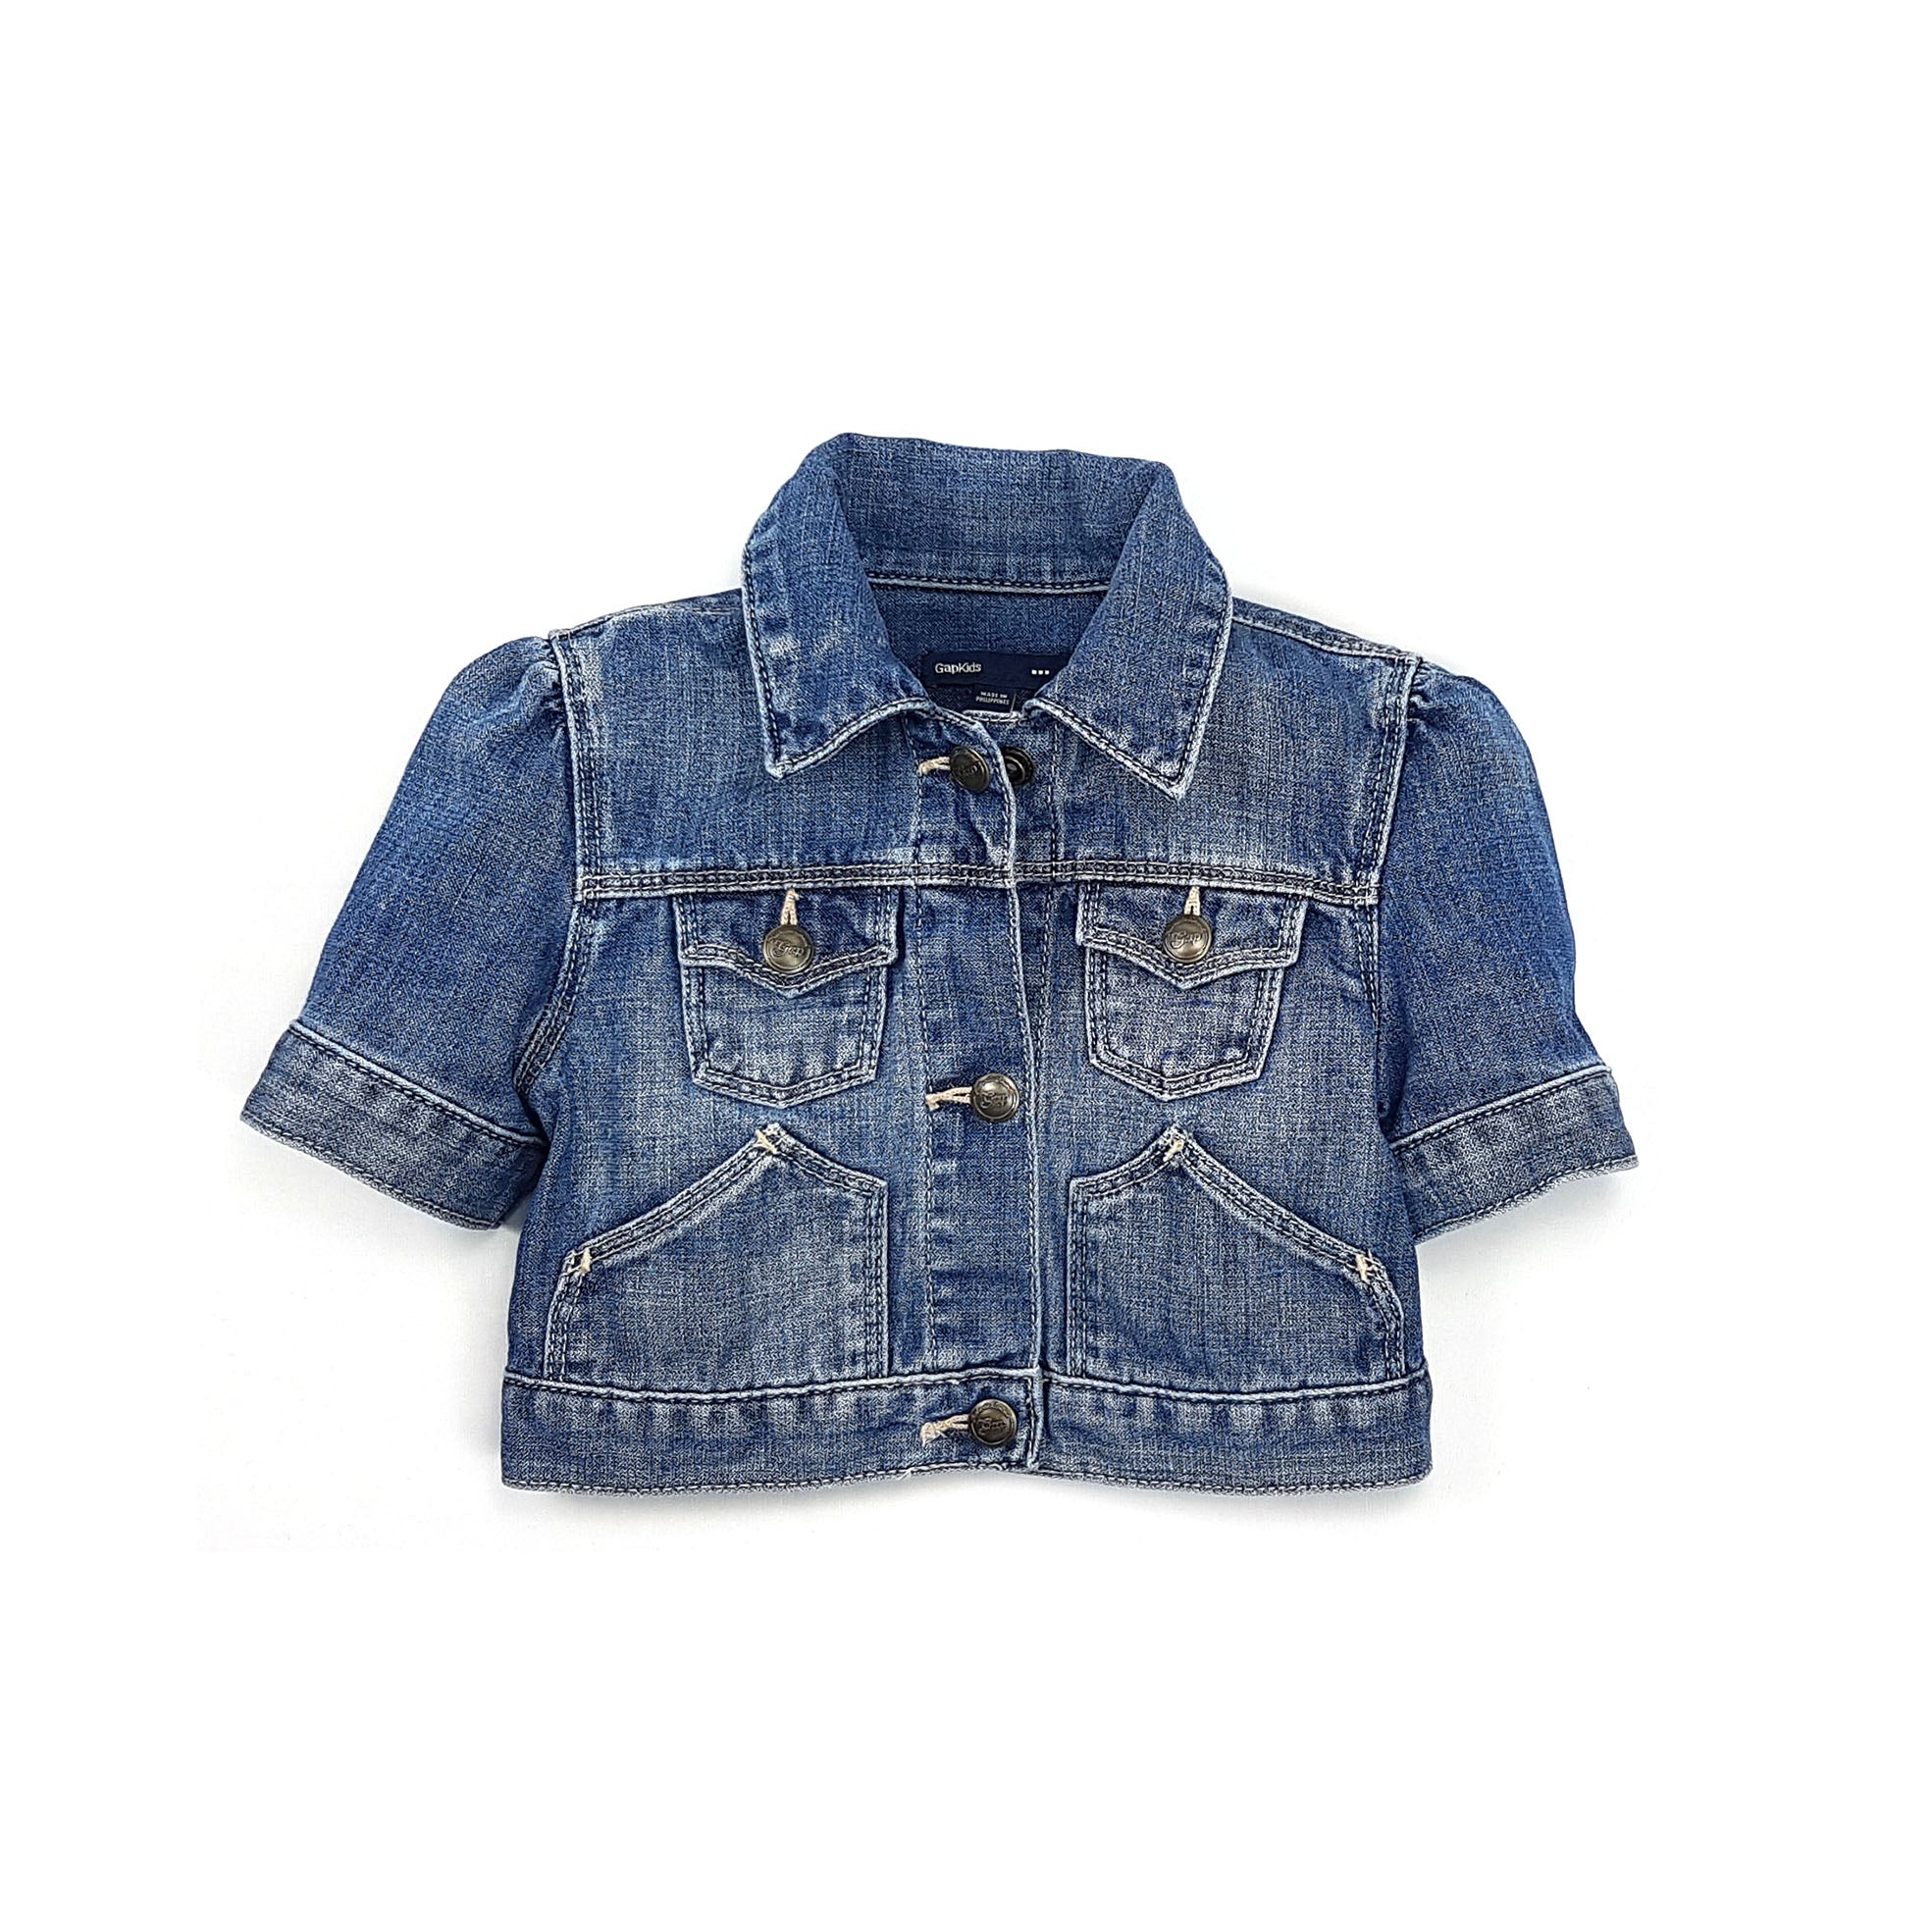 DreamFlex Colored Jean Jacket | Appleseeds